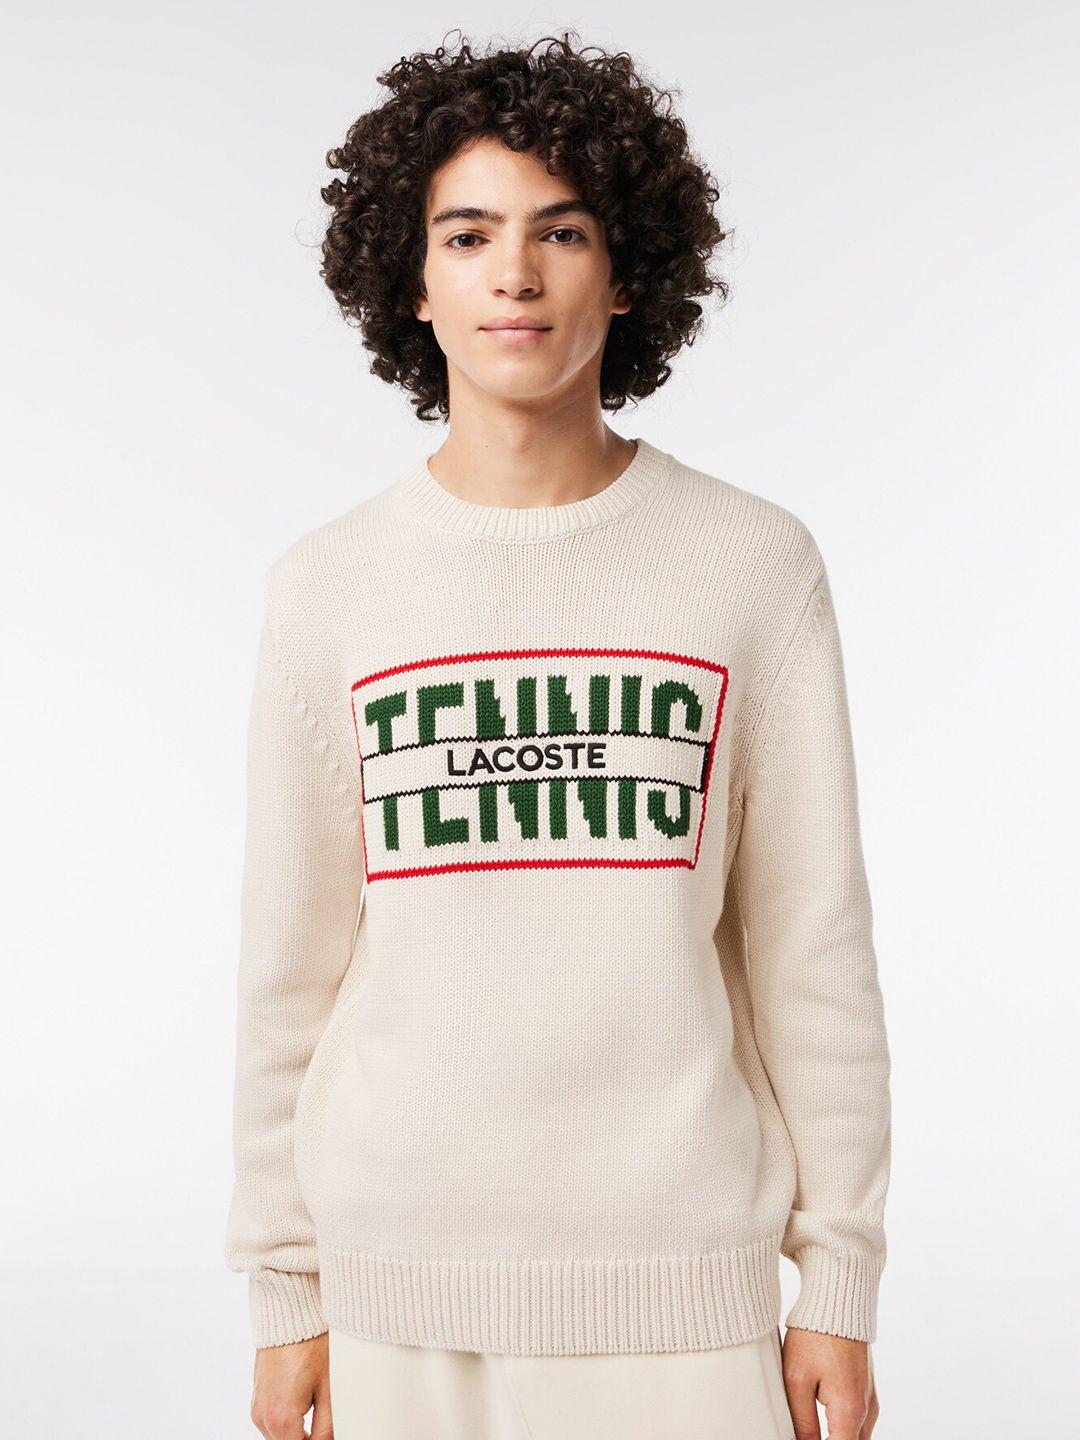 lacoste-typography-printed-pullover-sweater